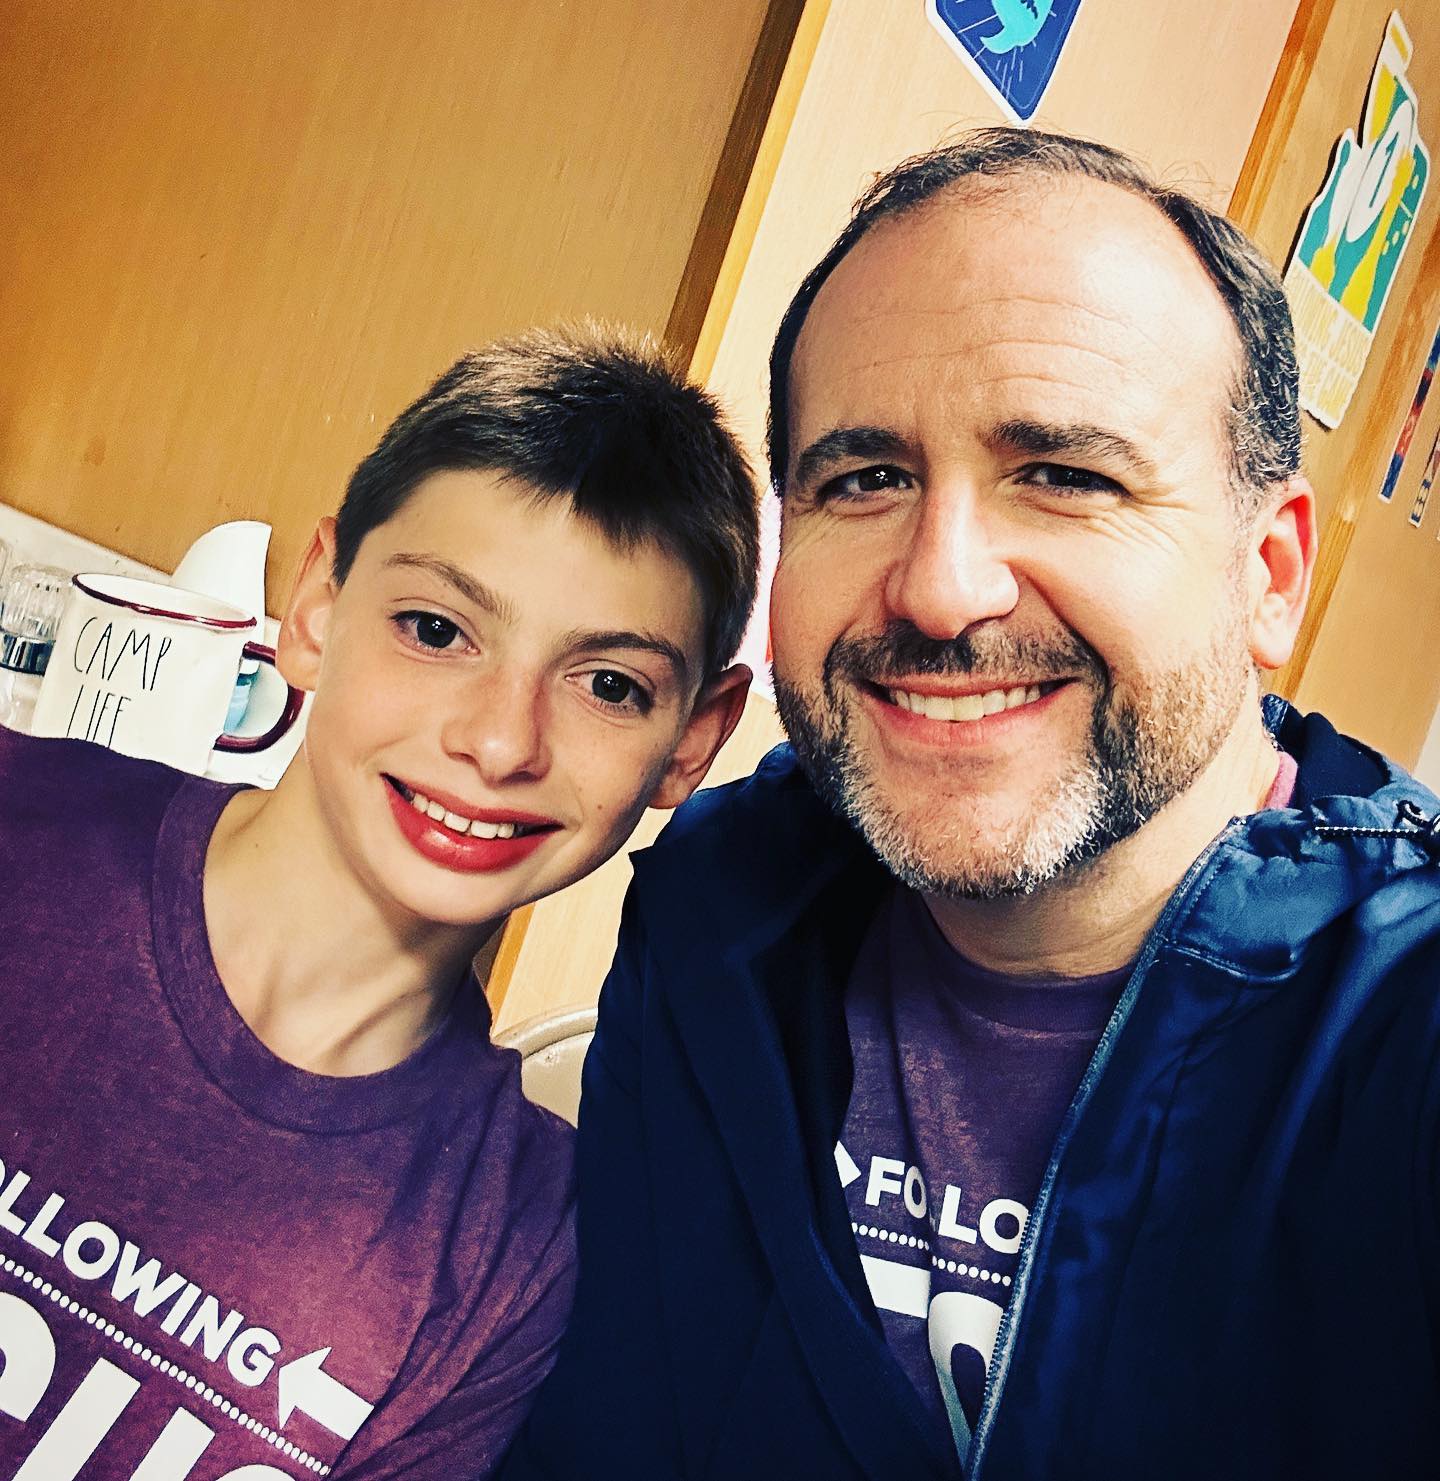 If you need to be encouraged, my buddy Parker is your man. Every day he has made a point to come to me and say, “your preaching sure is good.” I don’t know how Parker knew it, but I sure needed to hear that!